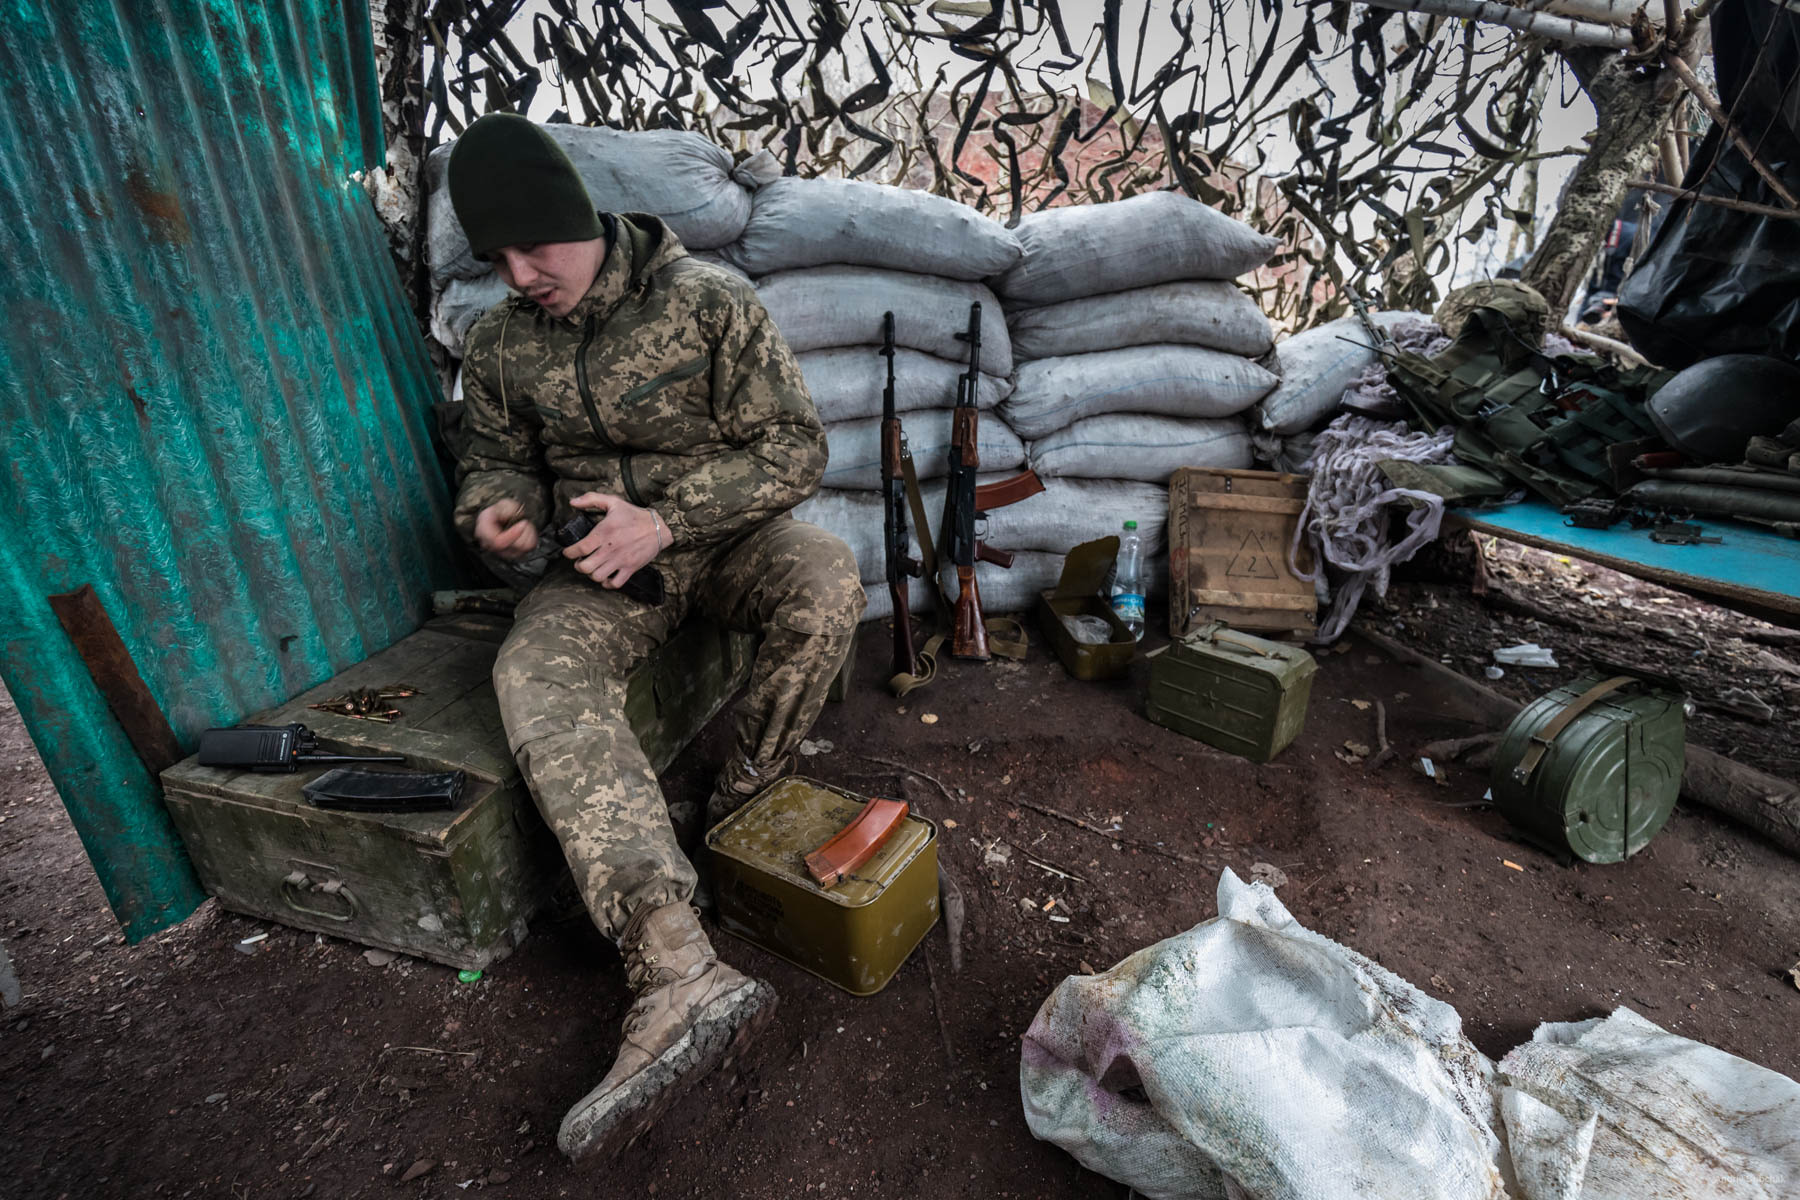 Alexander, a fighter from Kherson, reloads his assault rifle dispenser magazine on a position reinforced with refuse stone bags, on the gob pile near a town Zolote. - Do you want to go home? Sasha smiles: - I feel sad at home. In addition, here are our boys. It’s OK.  The guy is 20 years old. In a conversation, he often uses the phrase “It’s OK.”    District of Popasnoy, December 2017 